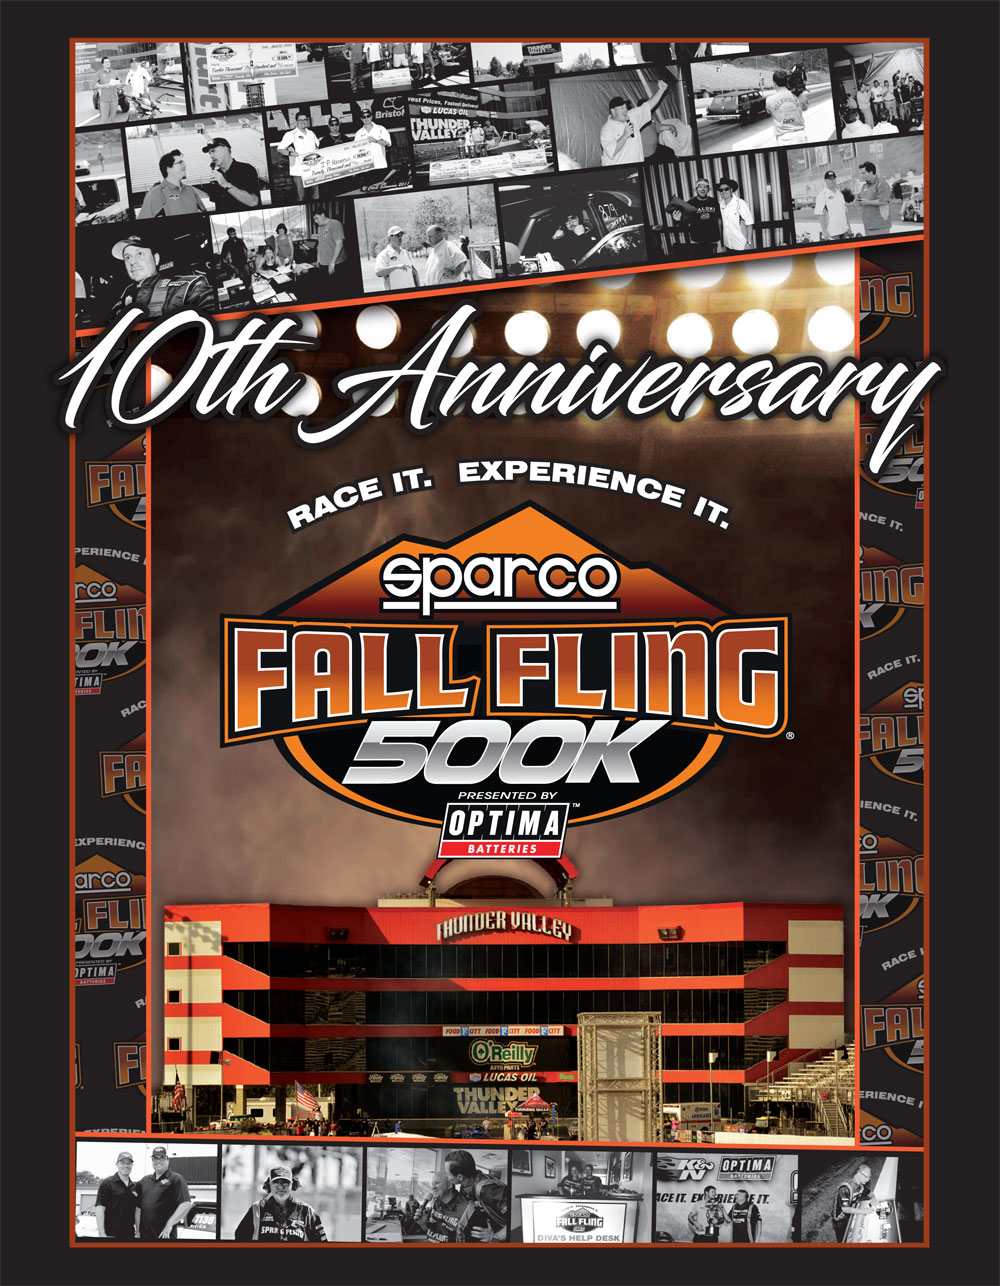 2019 Fall Fling Bristol Racer Guide page 2